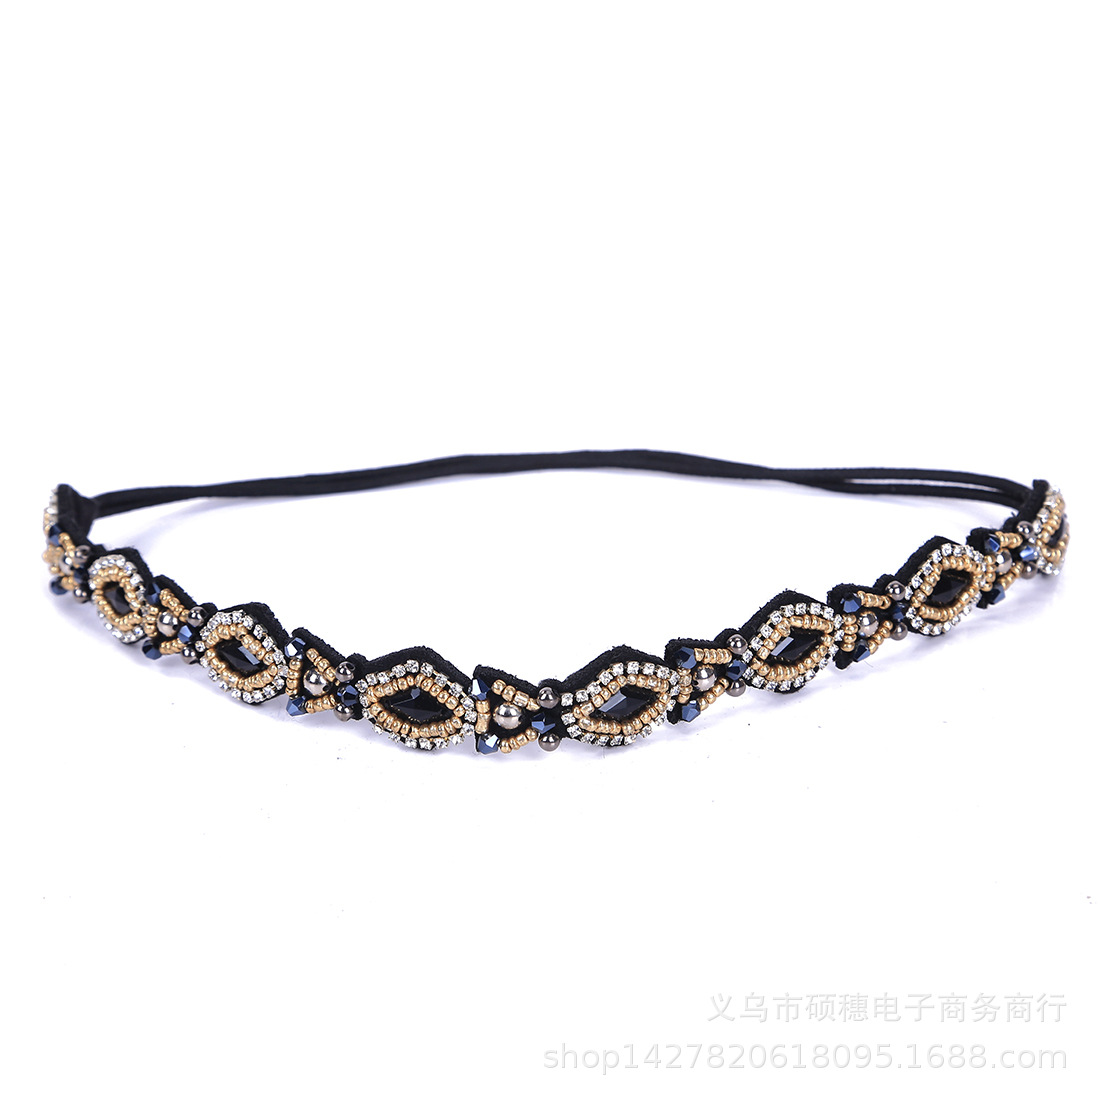 European and American Stylish Hair Accessories Beaded Sewing Bead Hairband Headband Cross-Border E-Commerce in Stock for a Long Time